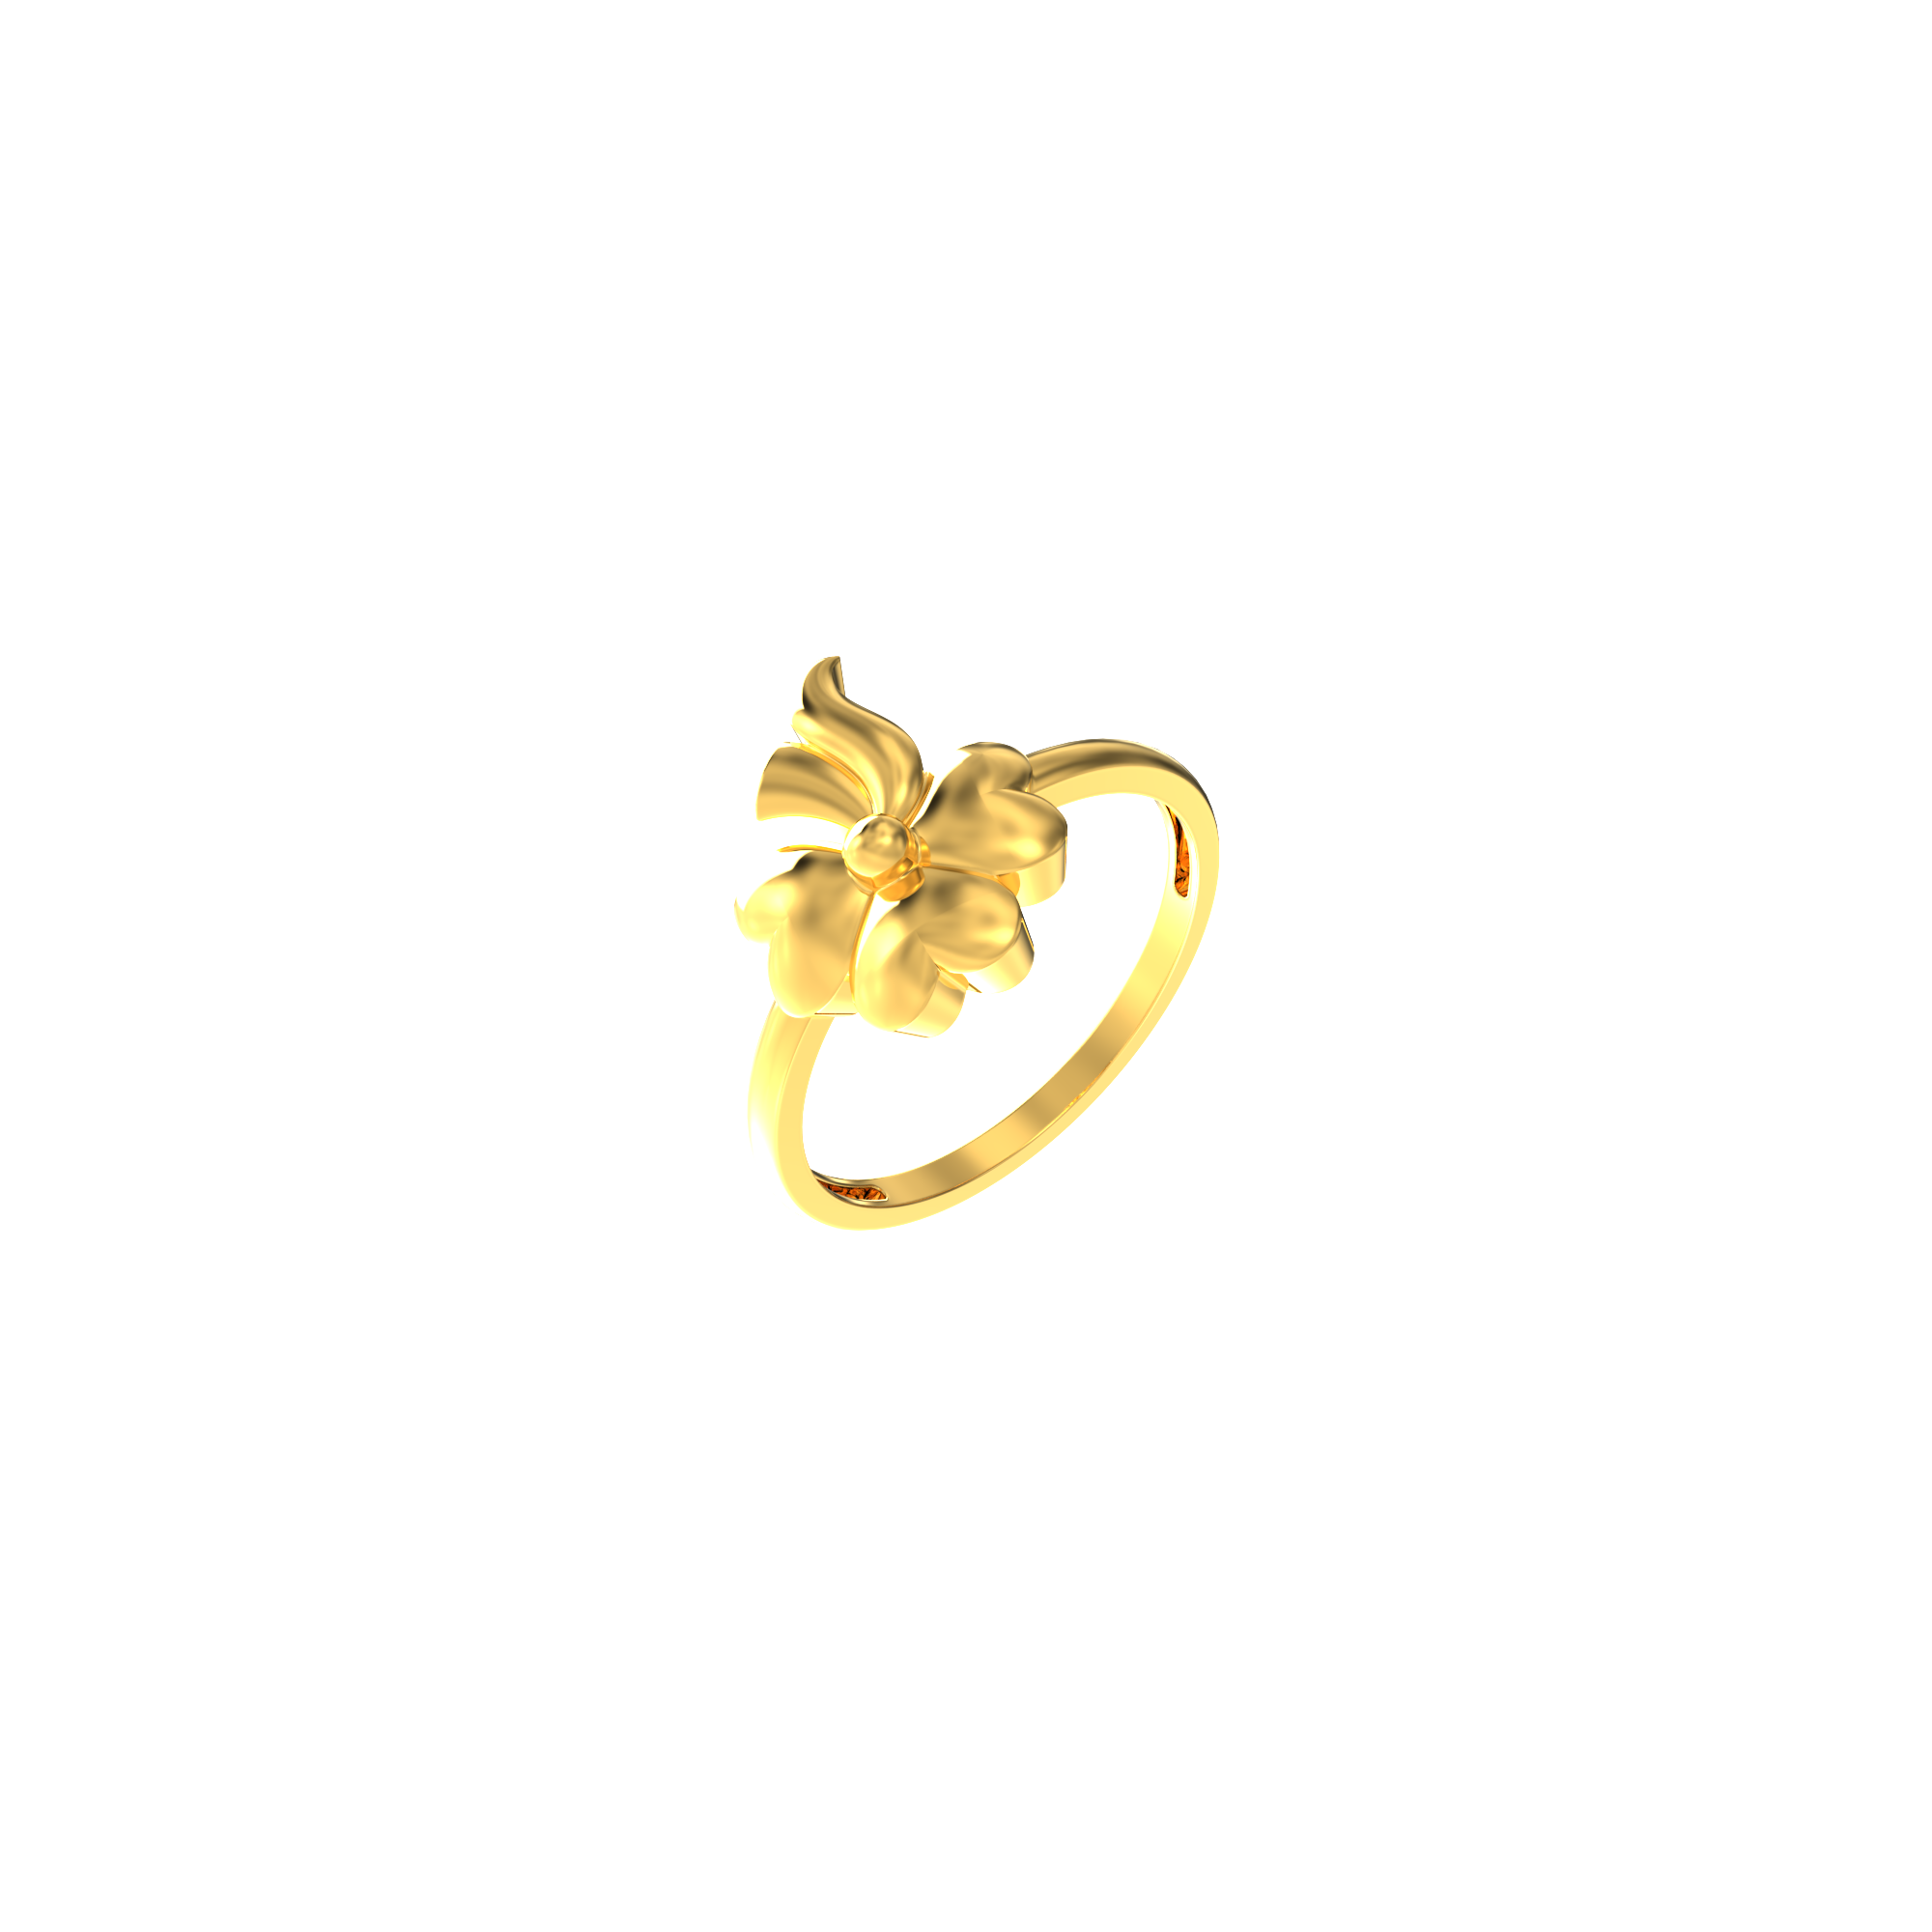 Buy quality Plain simple gold ring in Pune